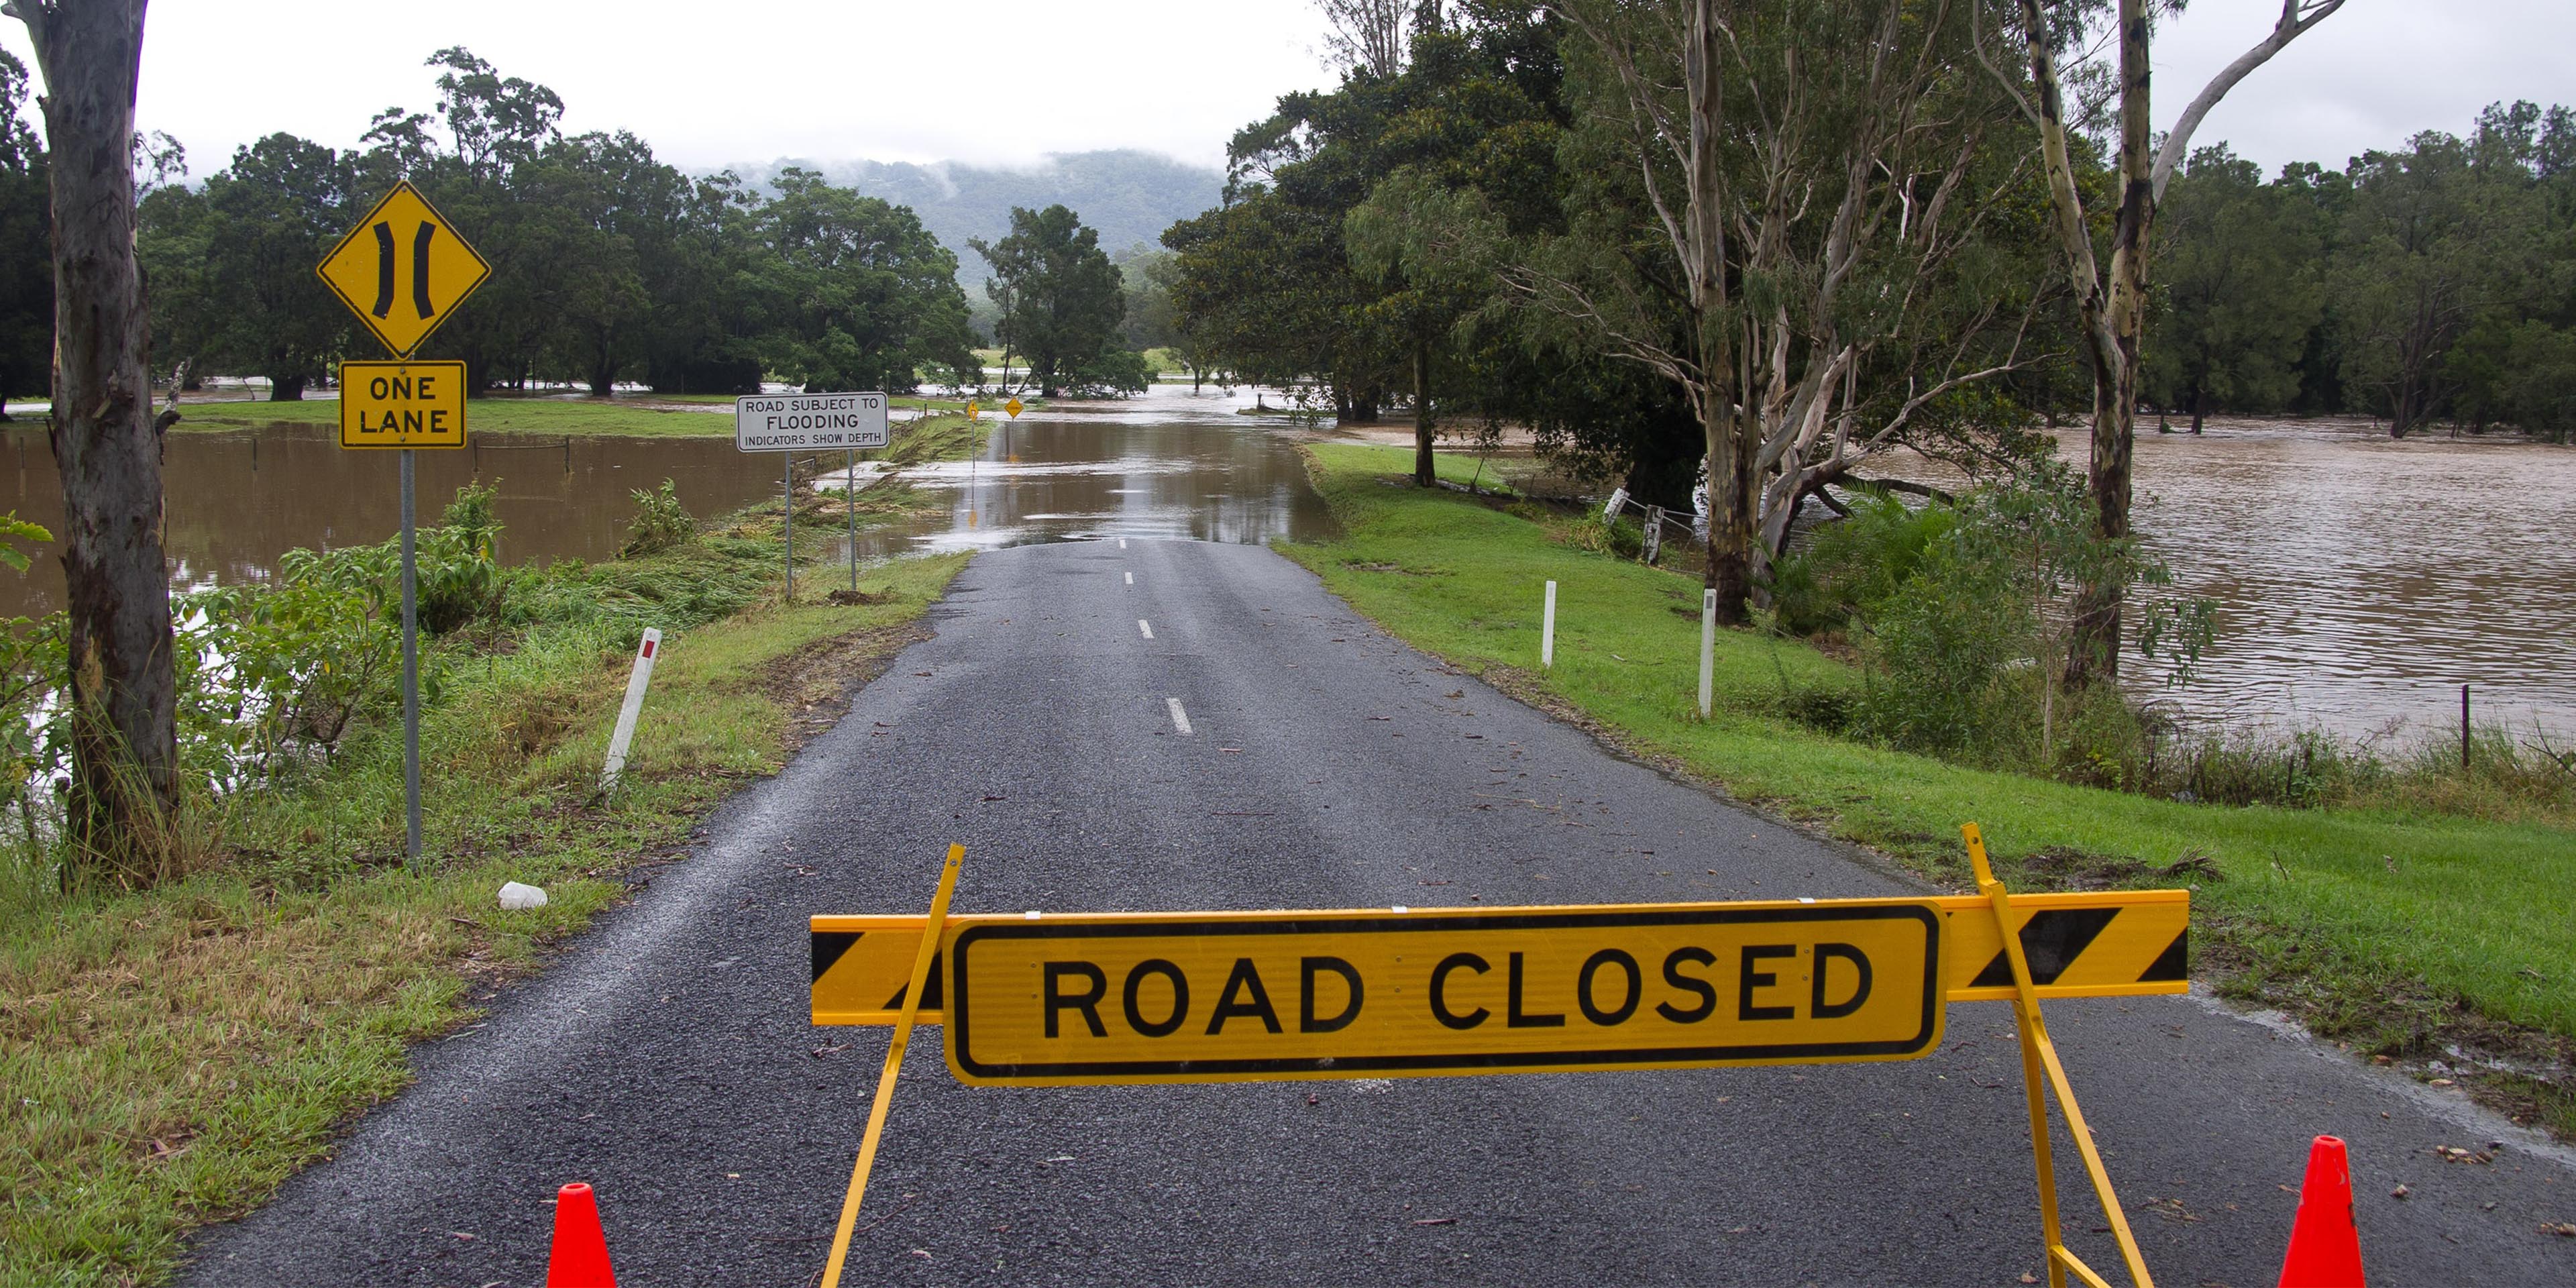 Road closed sign in front of flooded road with swollen river on both sides of the road.